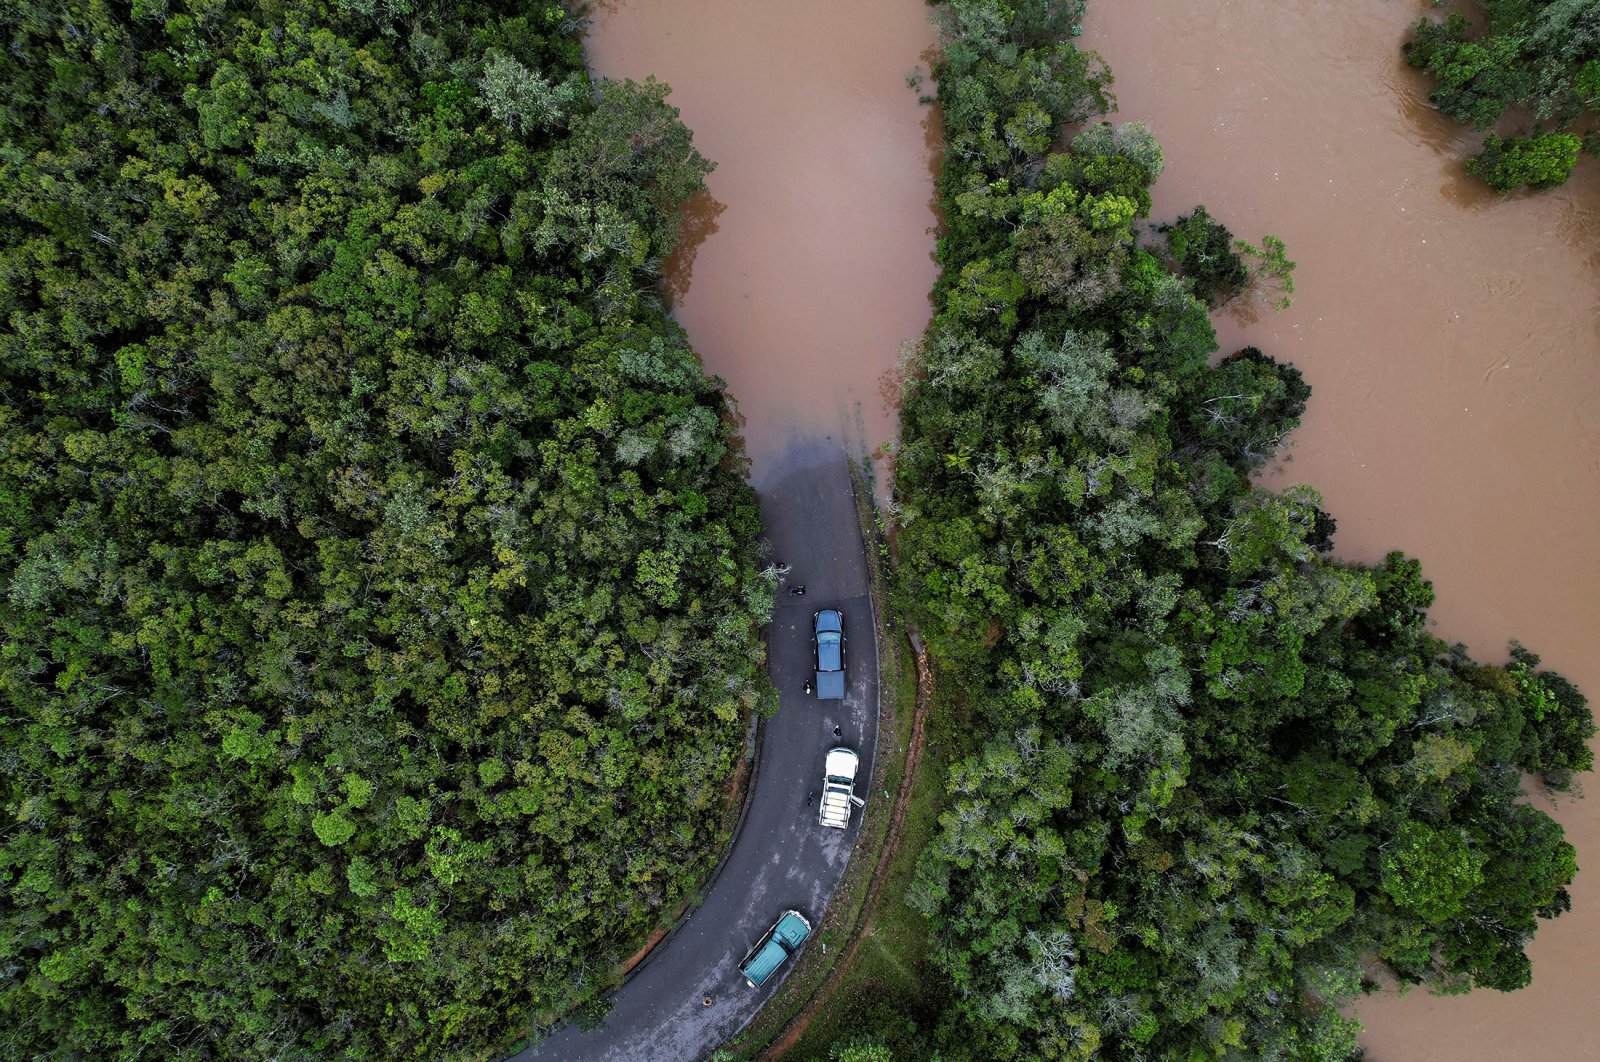 Cars stop before a flooded area, after Cyclone Batsirai made landfall, on a road in Vohiparara, Madagascar, Feb. 6, 2022. (Reuters Photo)